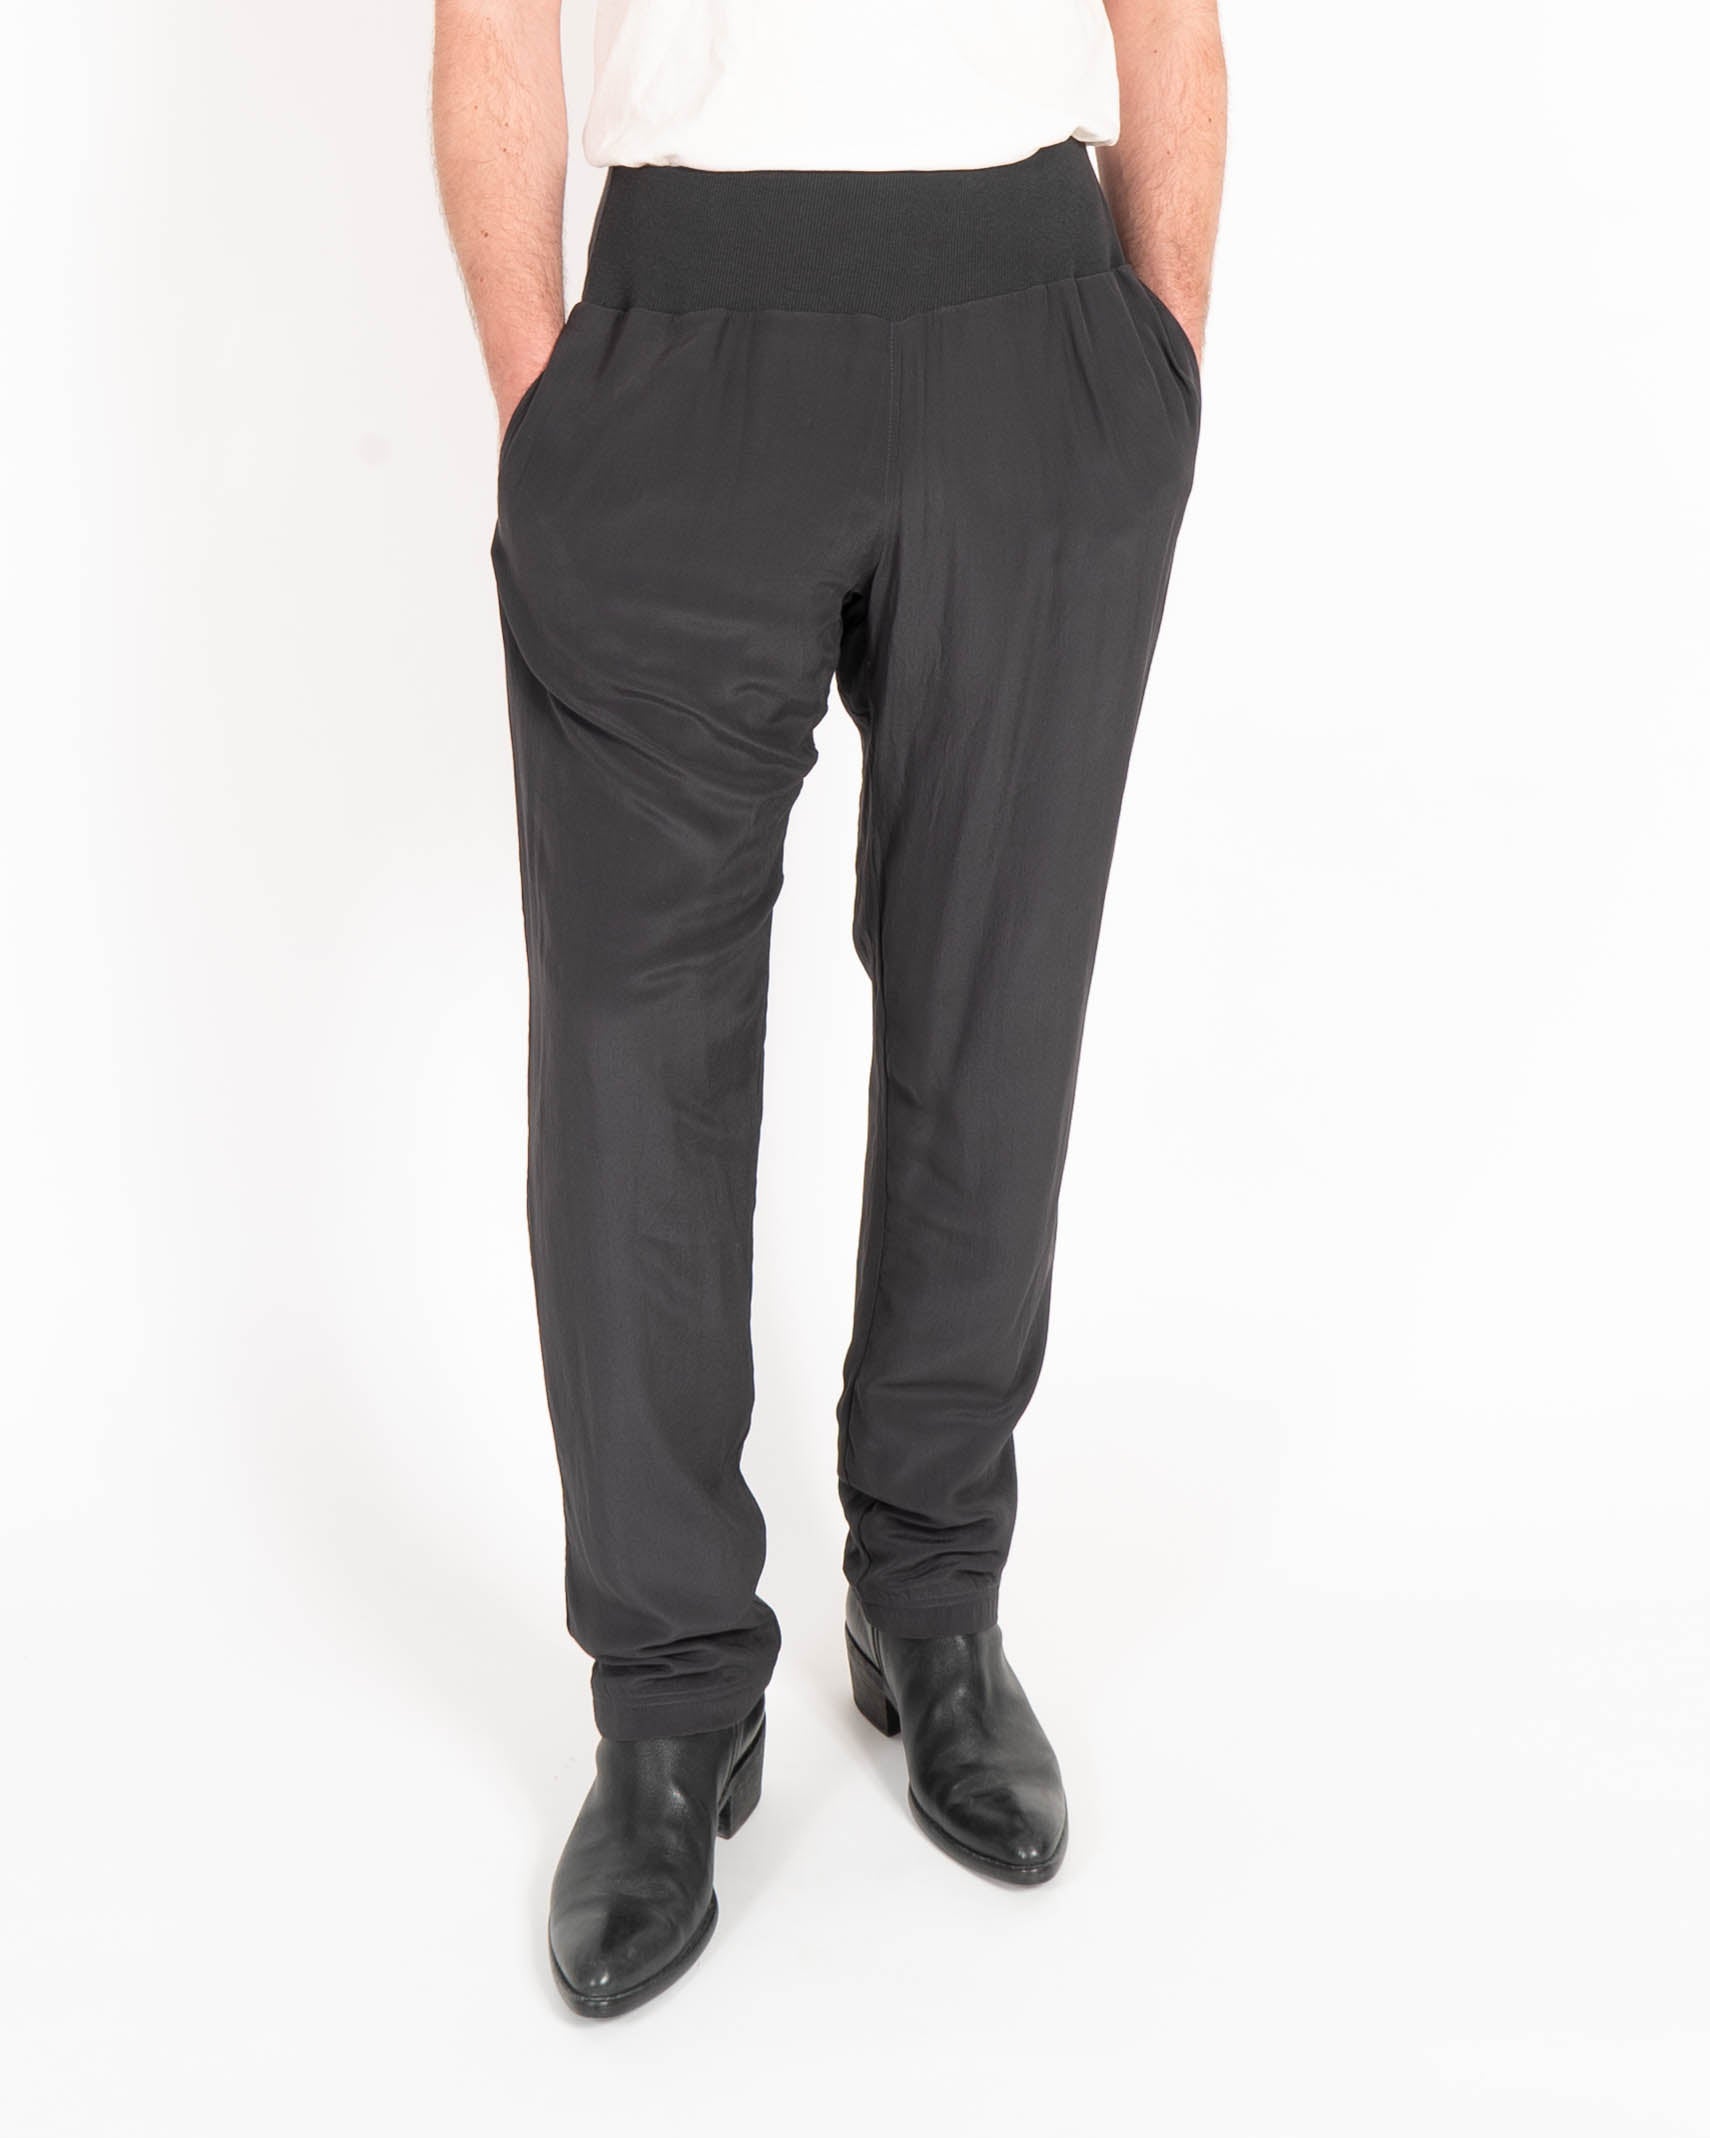 SS20 Knitted Waistband Trousers in Grey Silk